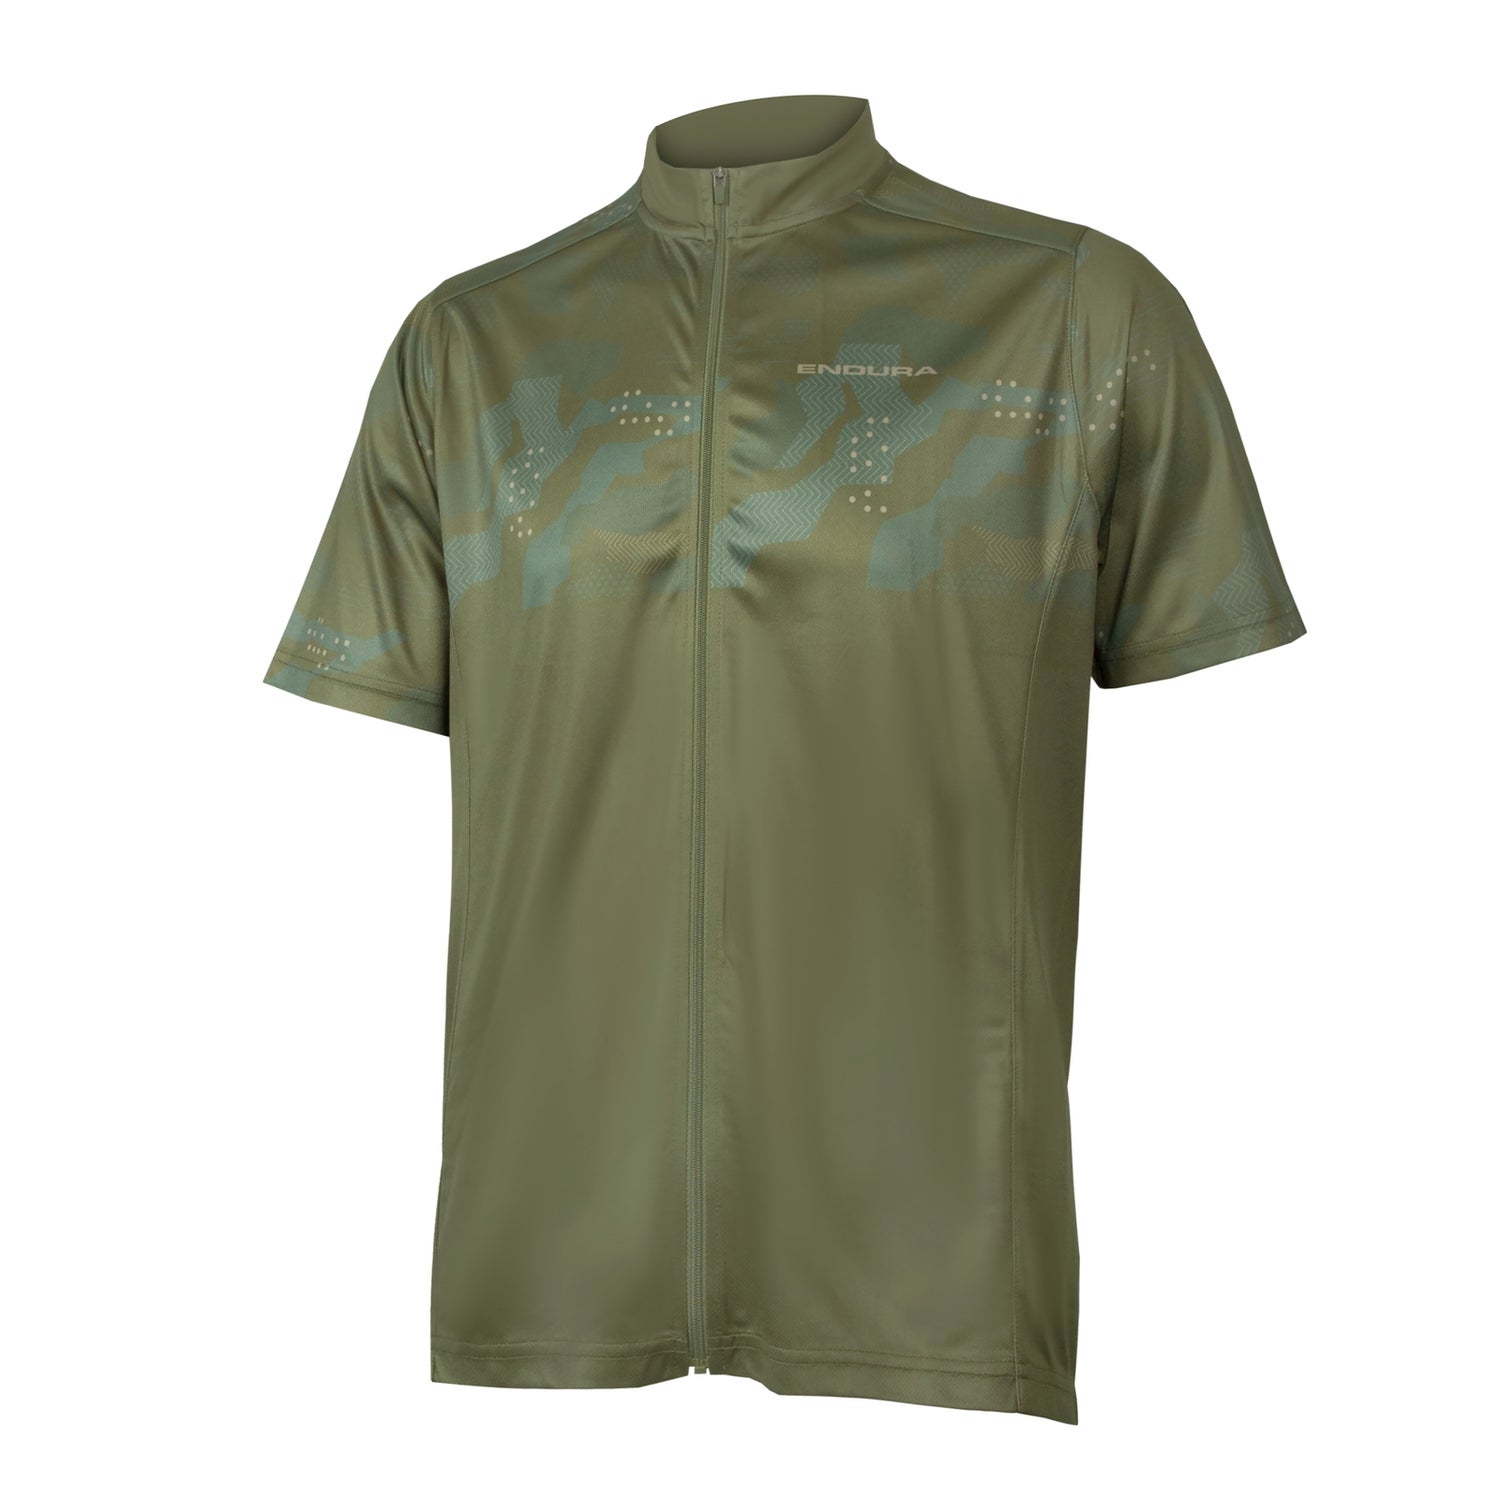 Men's Hummvee Ray S/S Jersey - Olive Green - XL